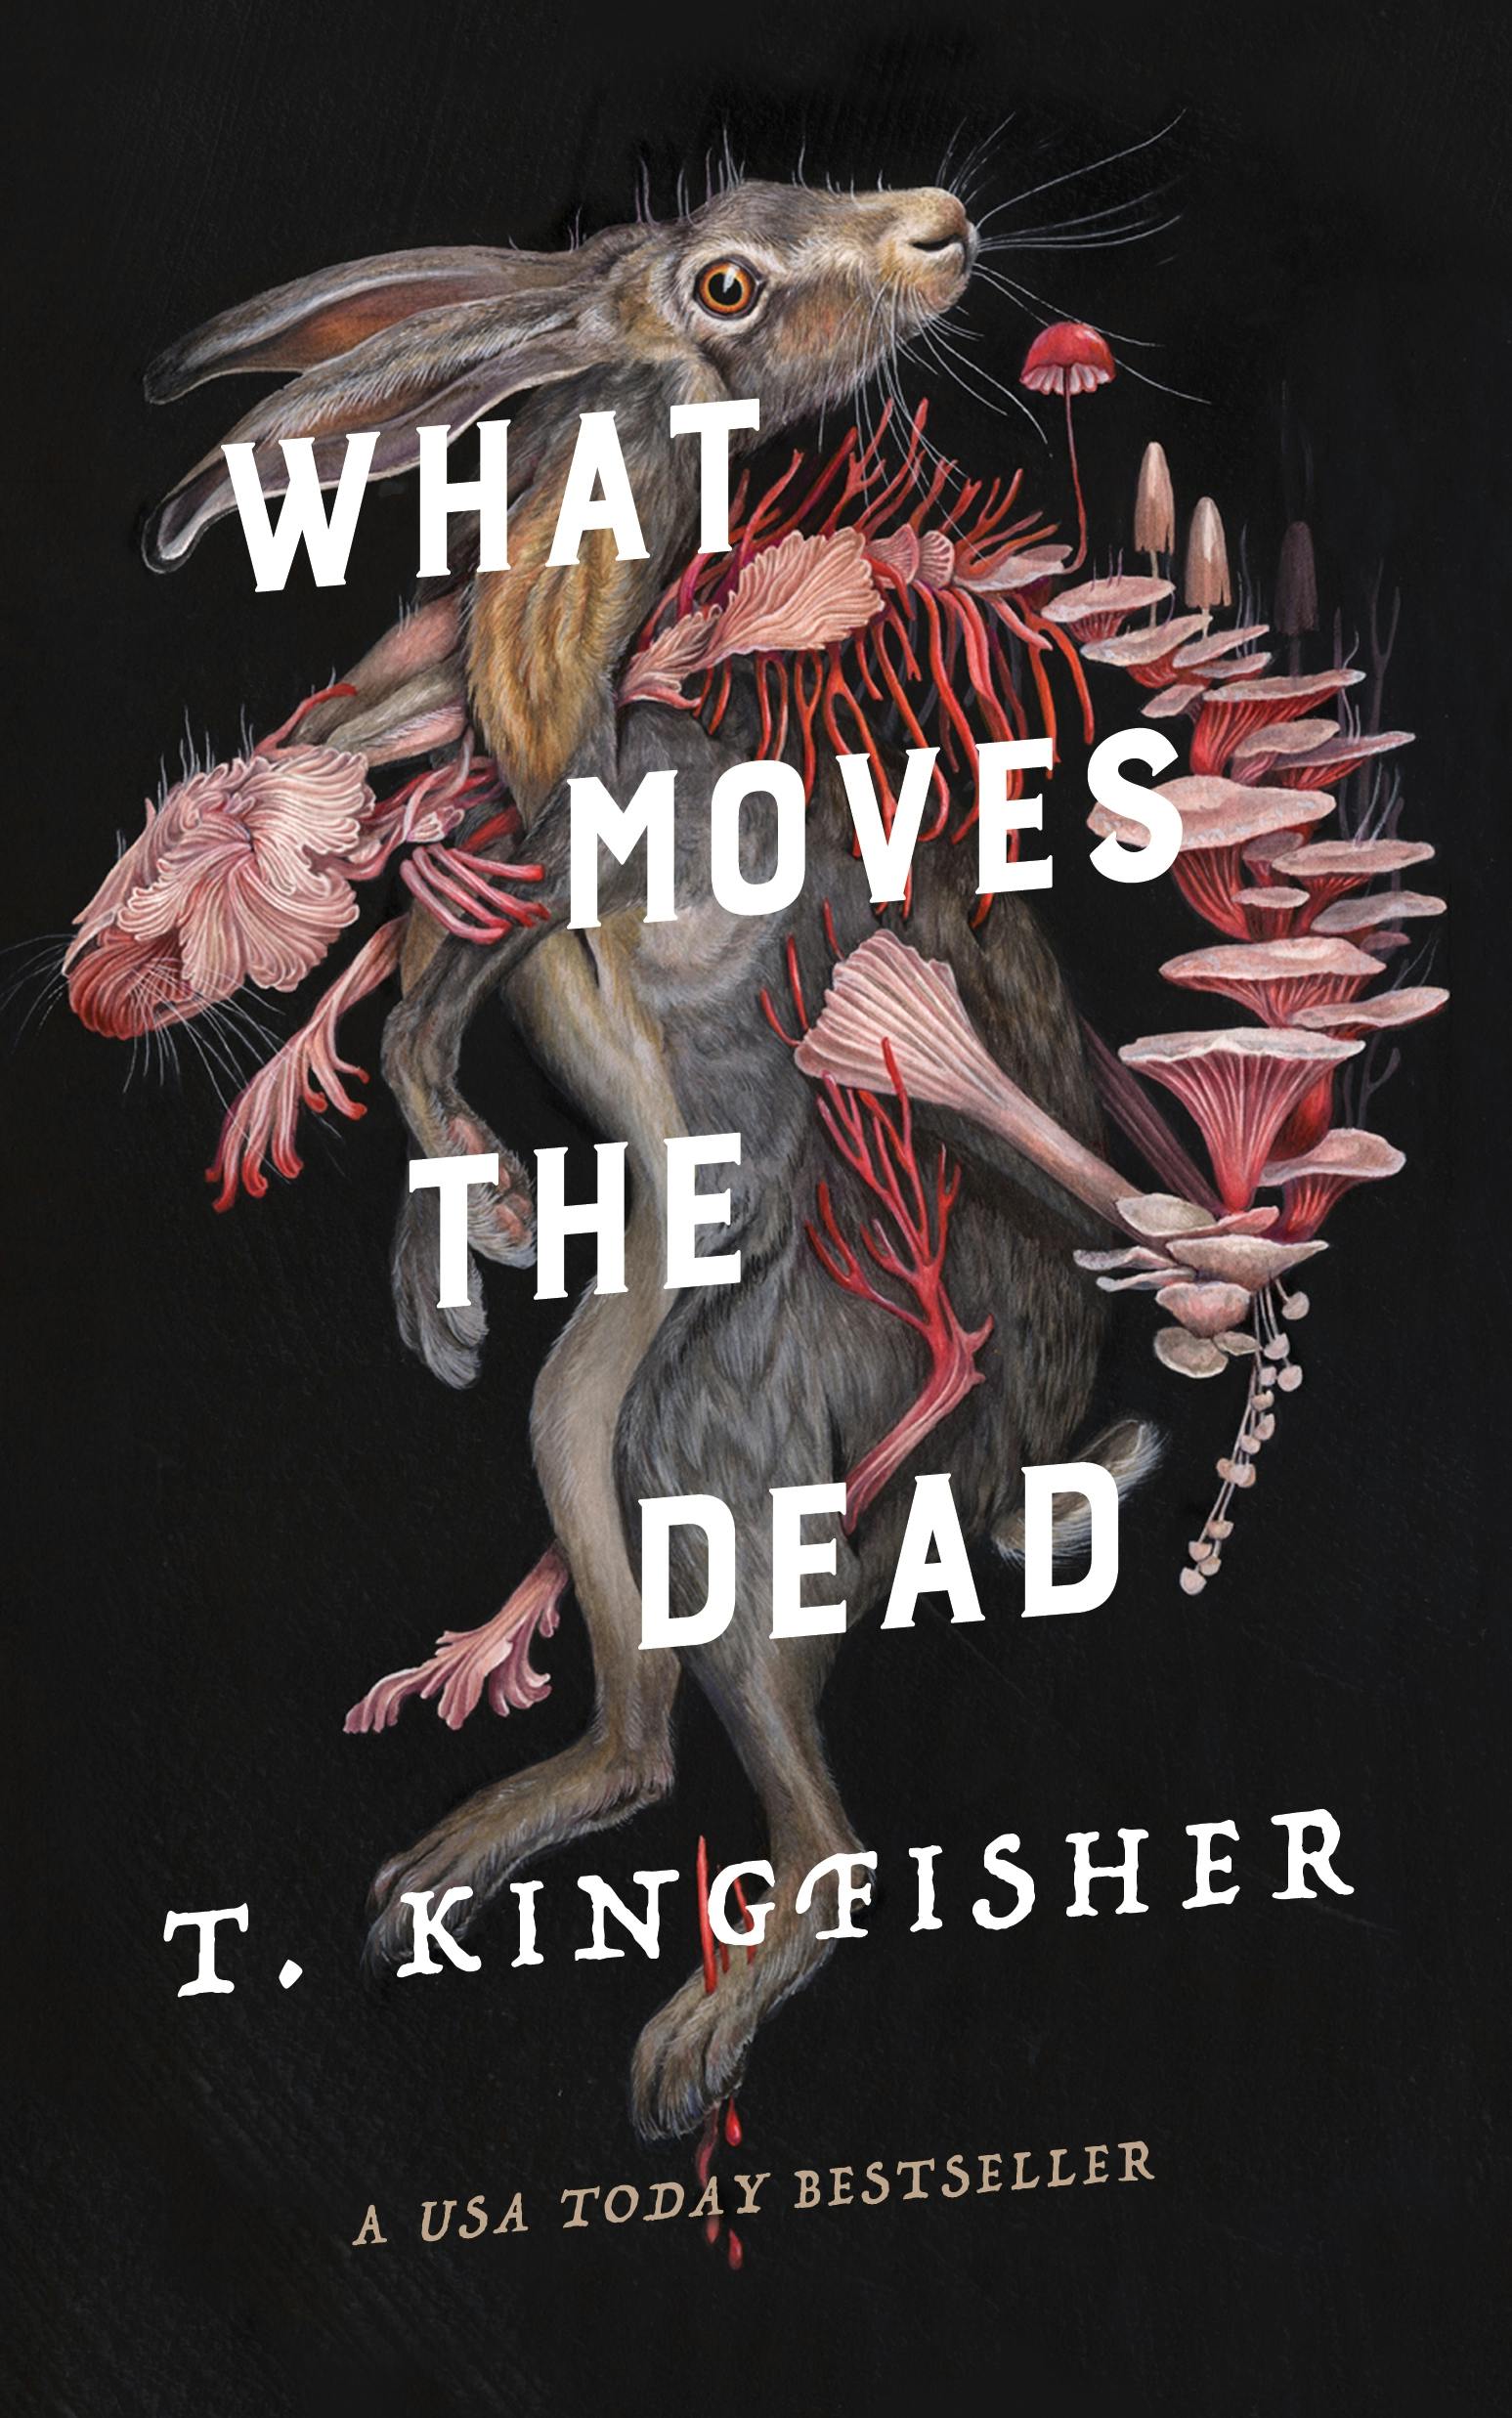 Cover for the book titled as: What Moves the Dead